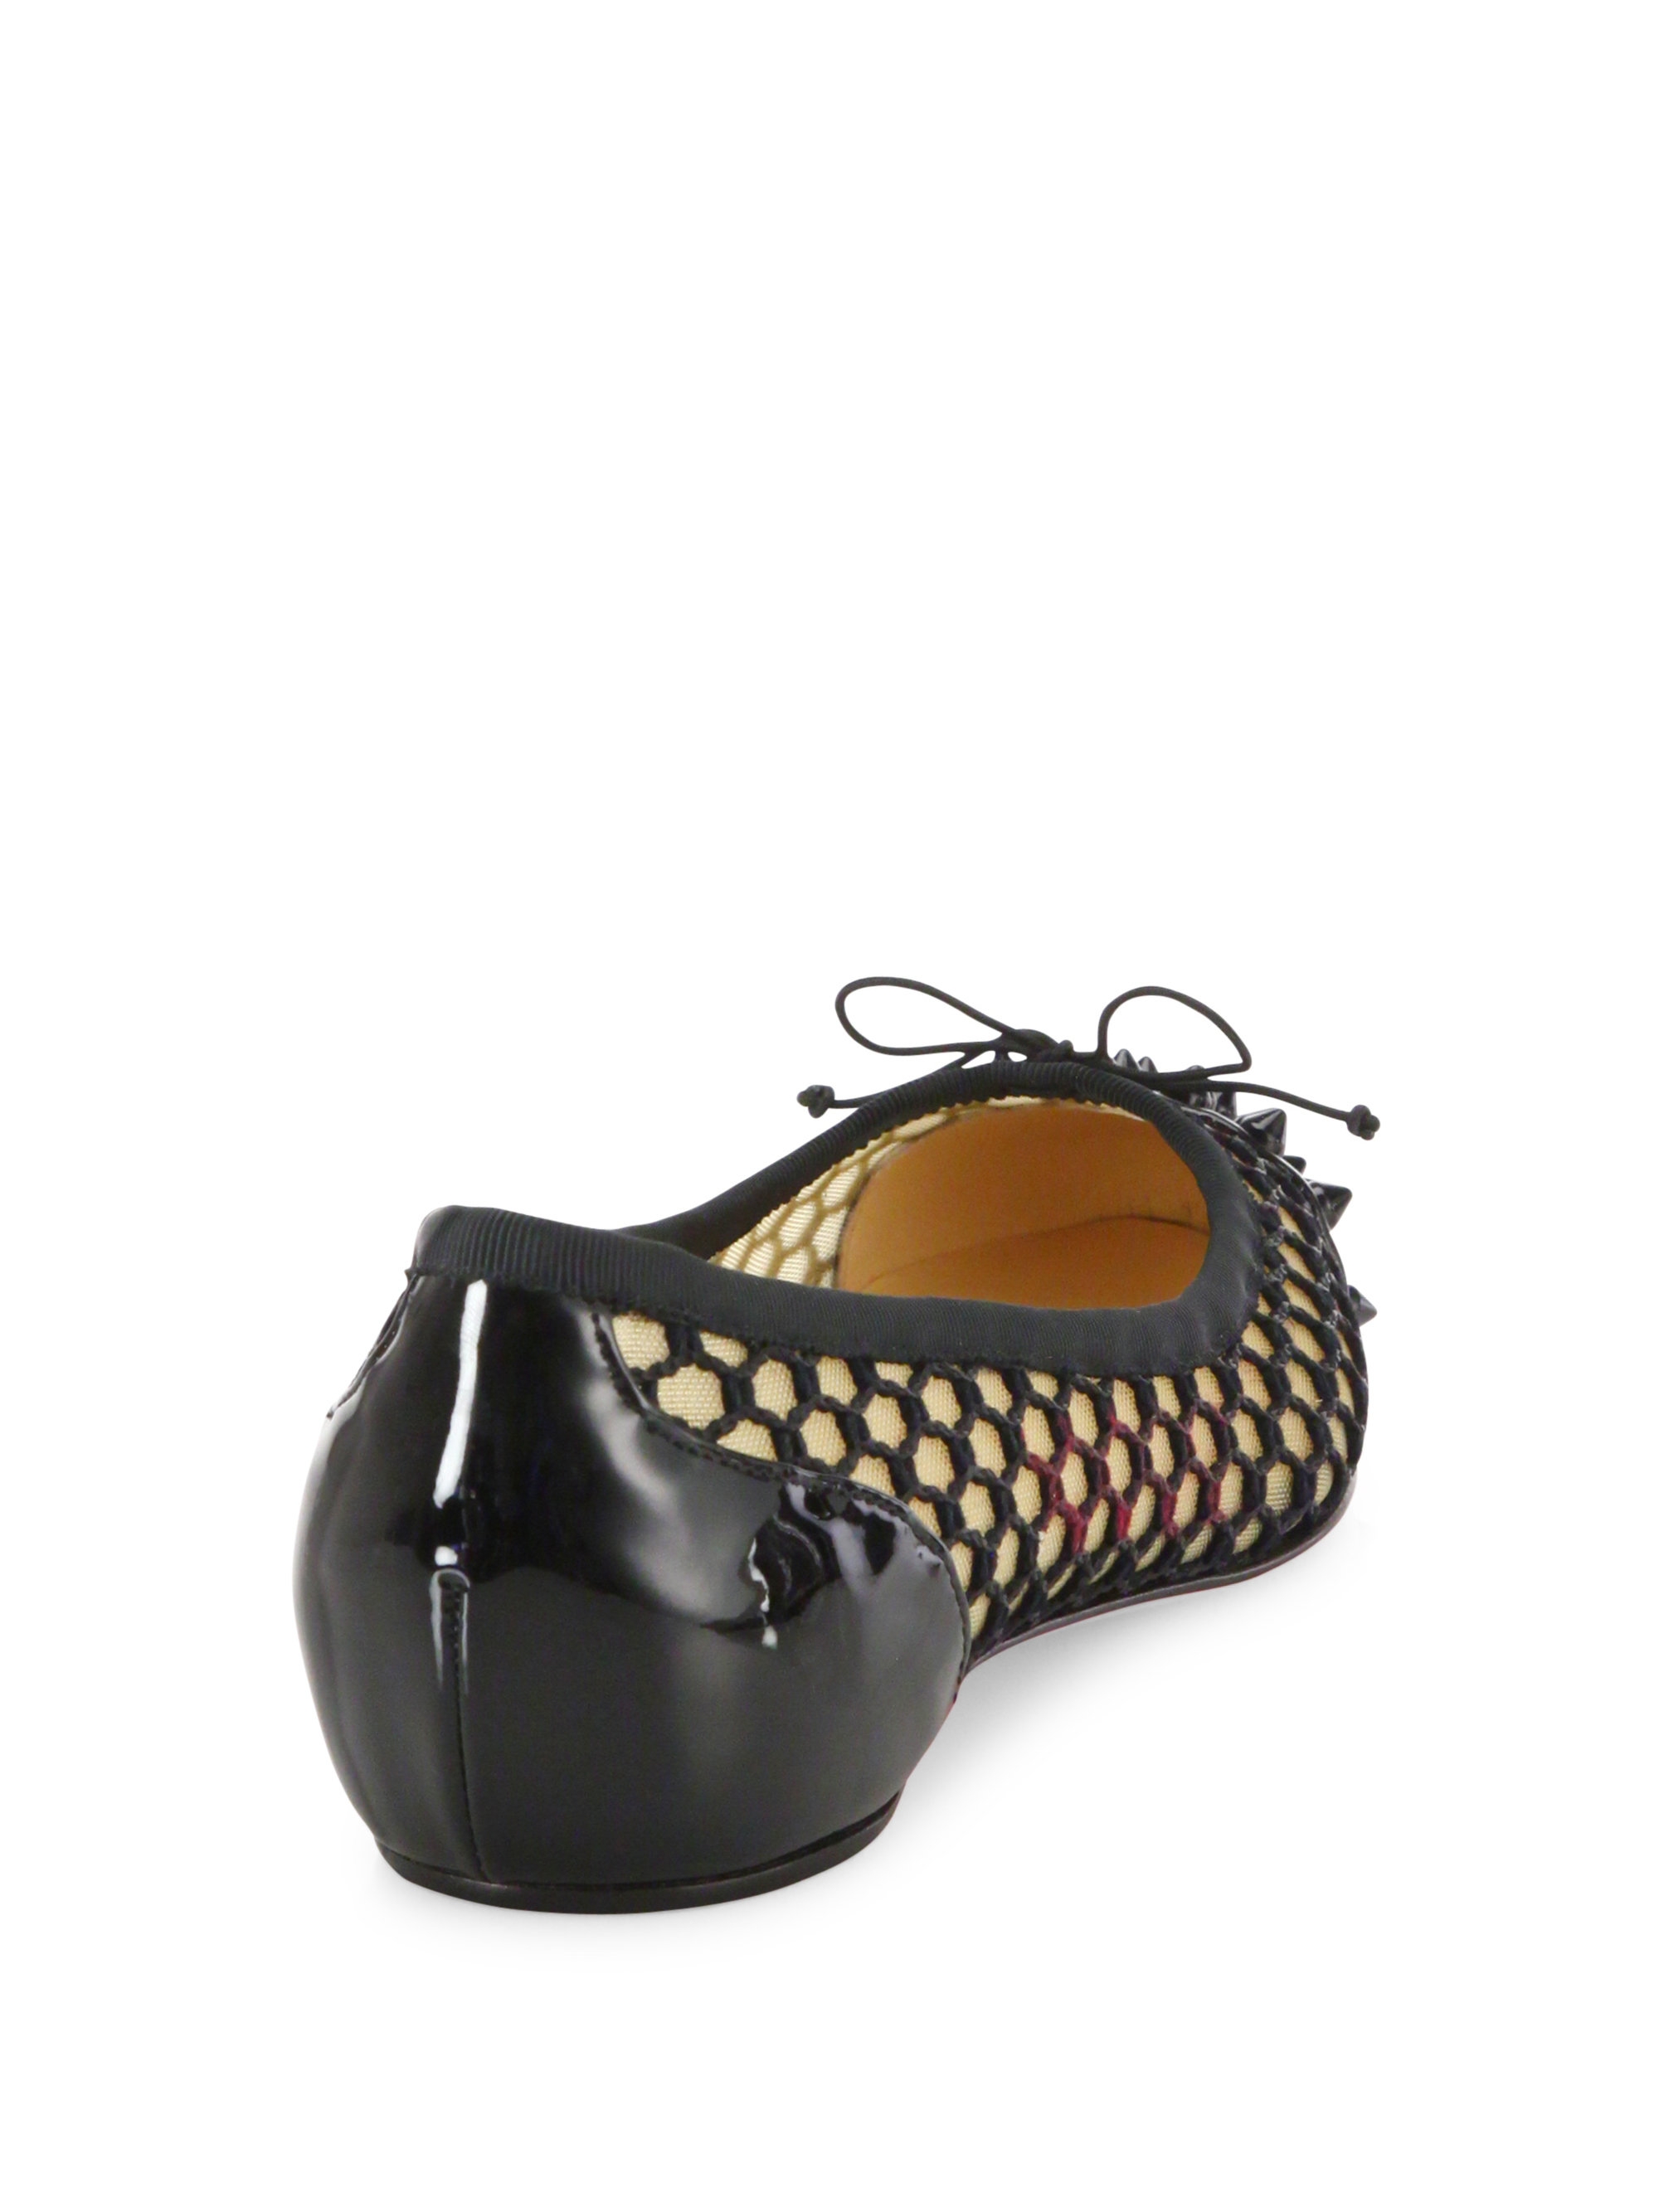 christian louboutin knockoff - Christian louboutin Mix Patent Spiked Knotted Mesh Flats in Black ...